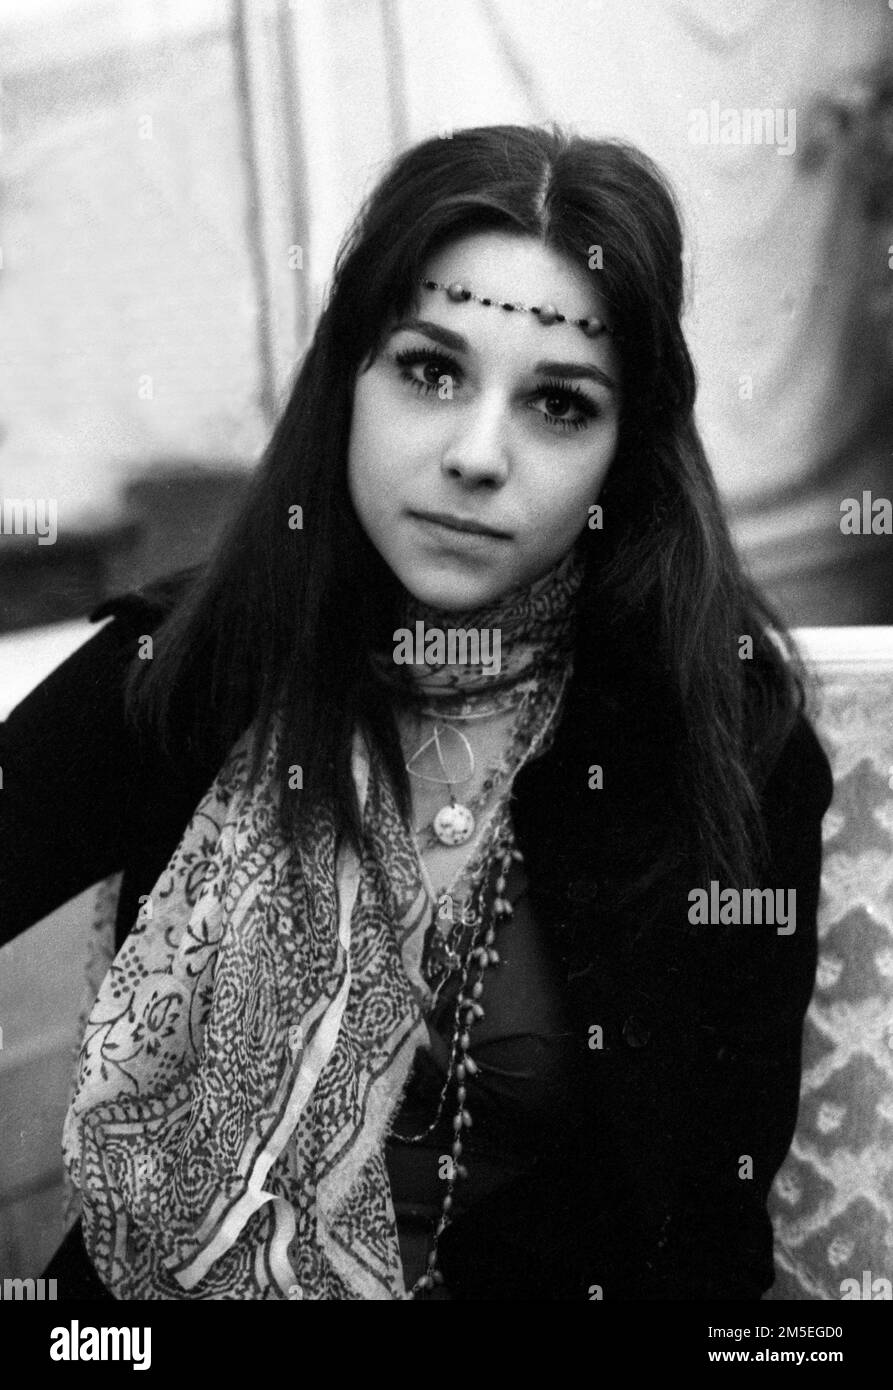 Photo by Tony Henshaw A young woman looking very much a hippy c1970 Photo by Tony Henshaw Stock Photo